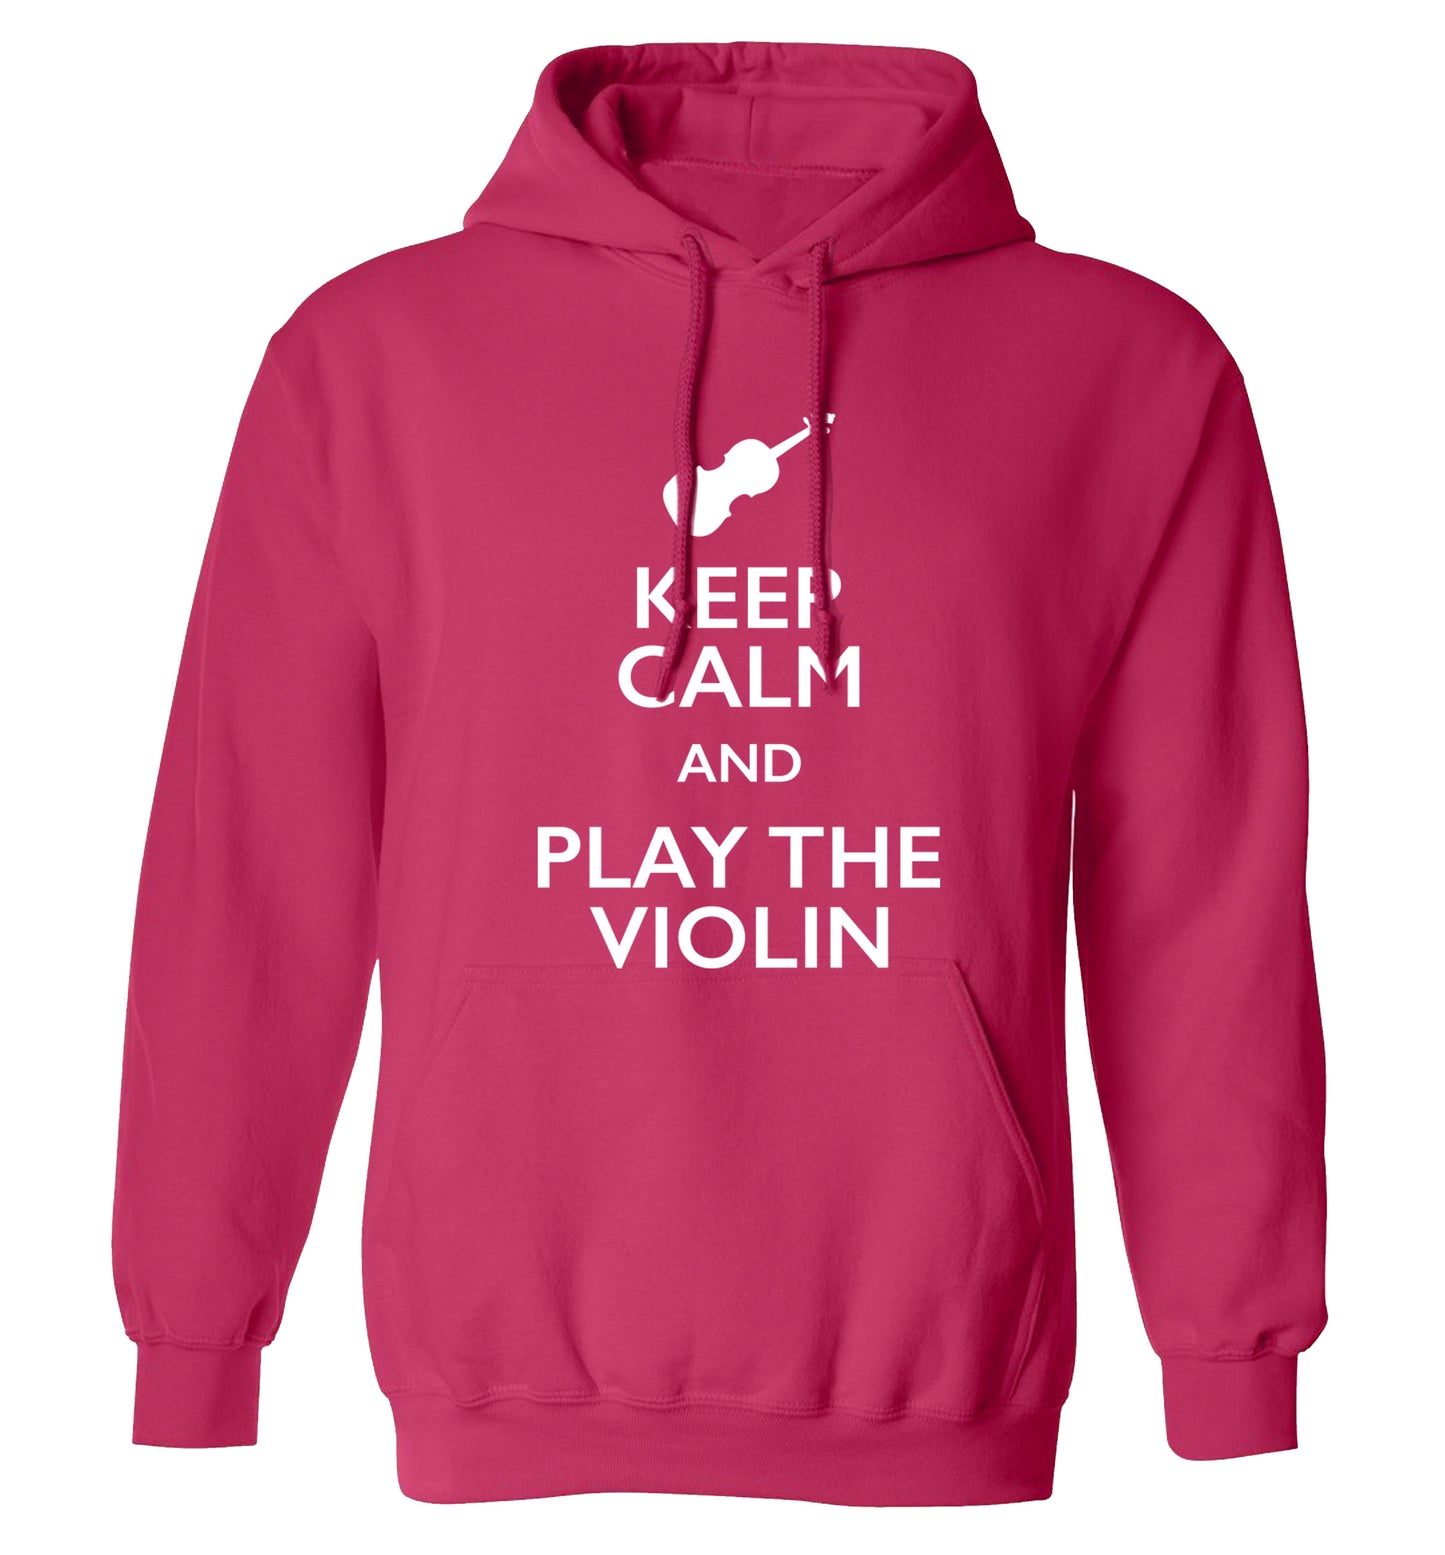 Keep calm and play the violin adults unisex pink hoodie 2XL